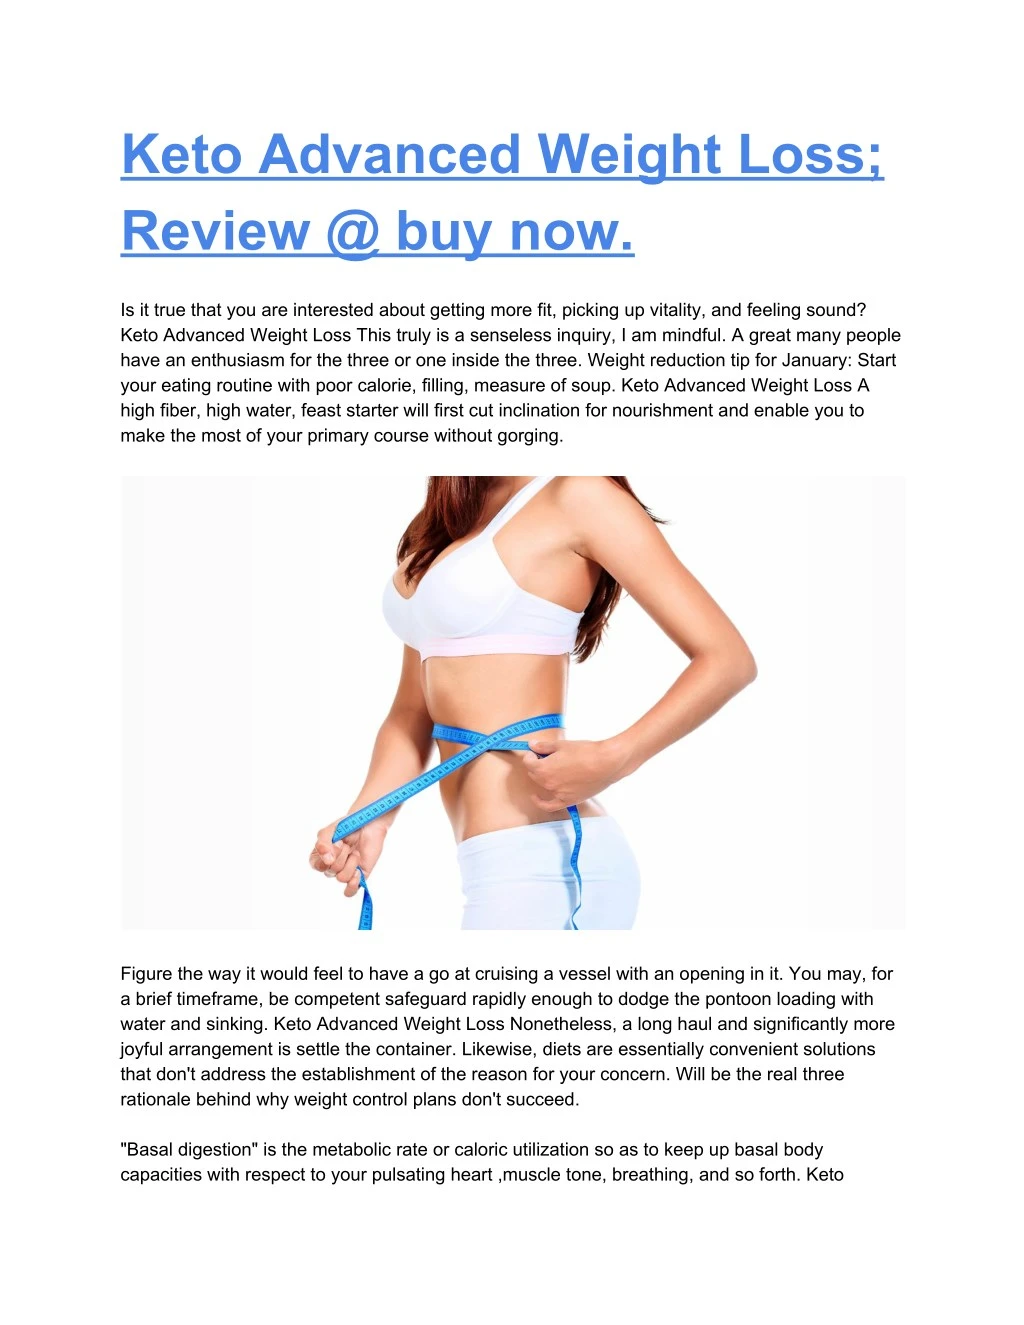 keto advanced weight loss review @ buy now